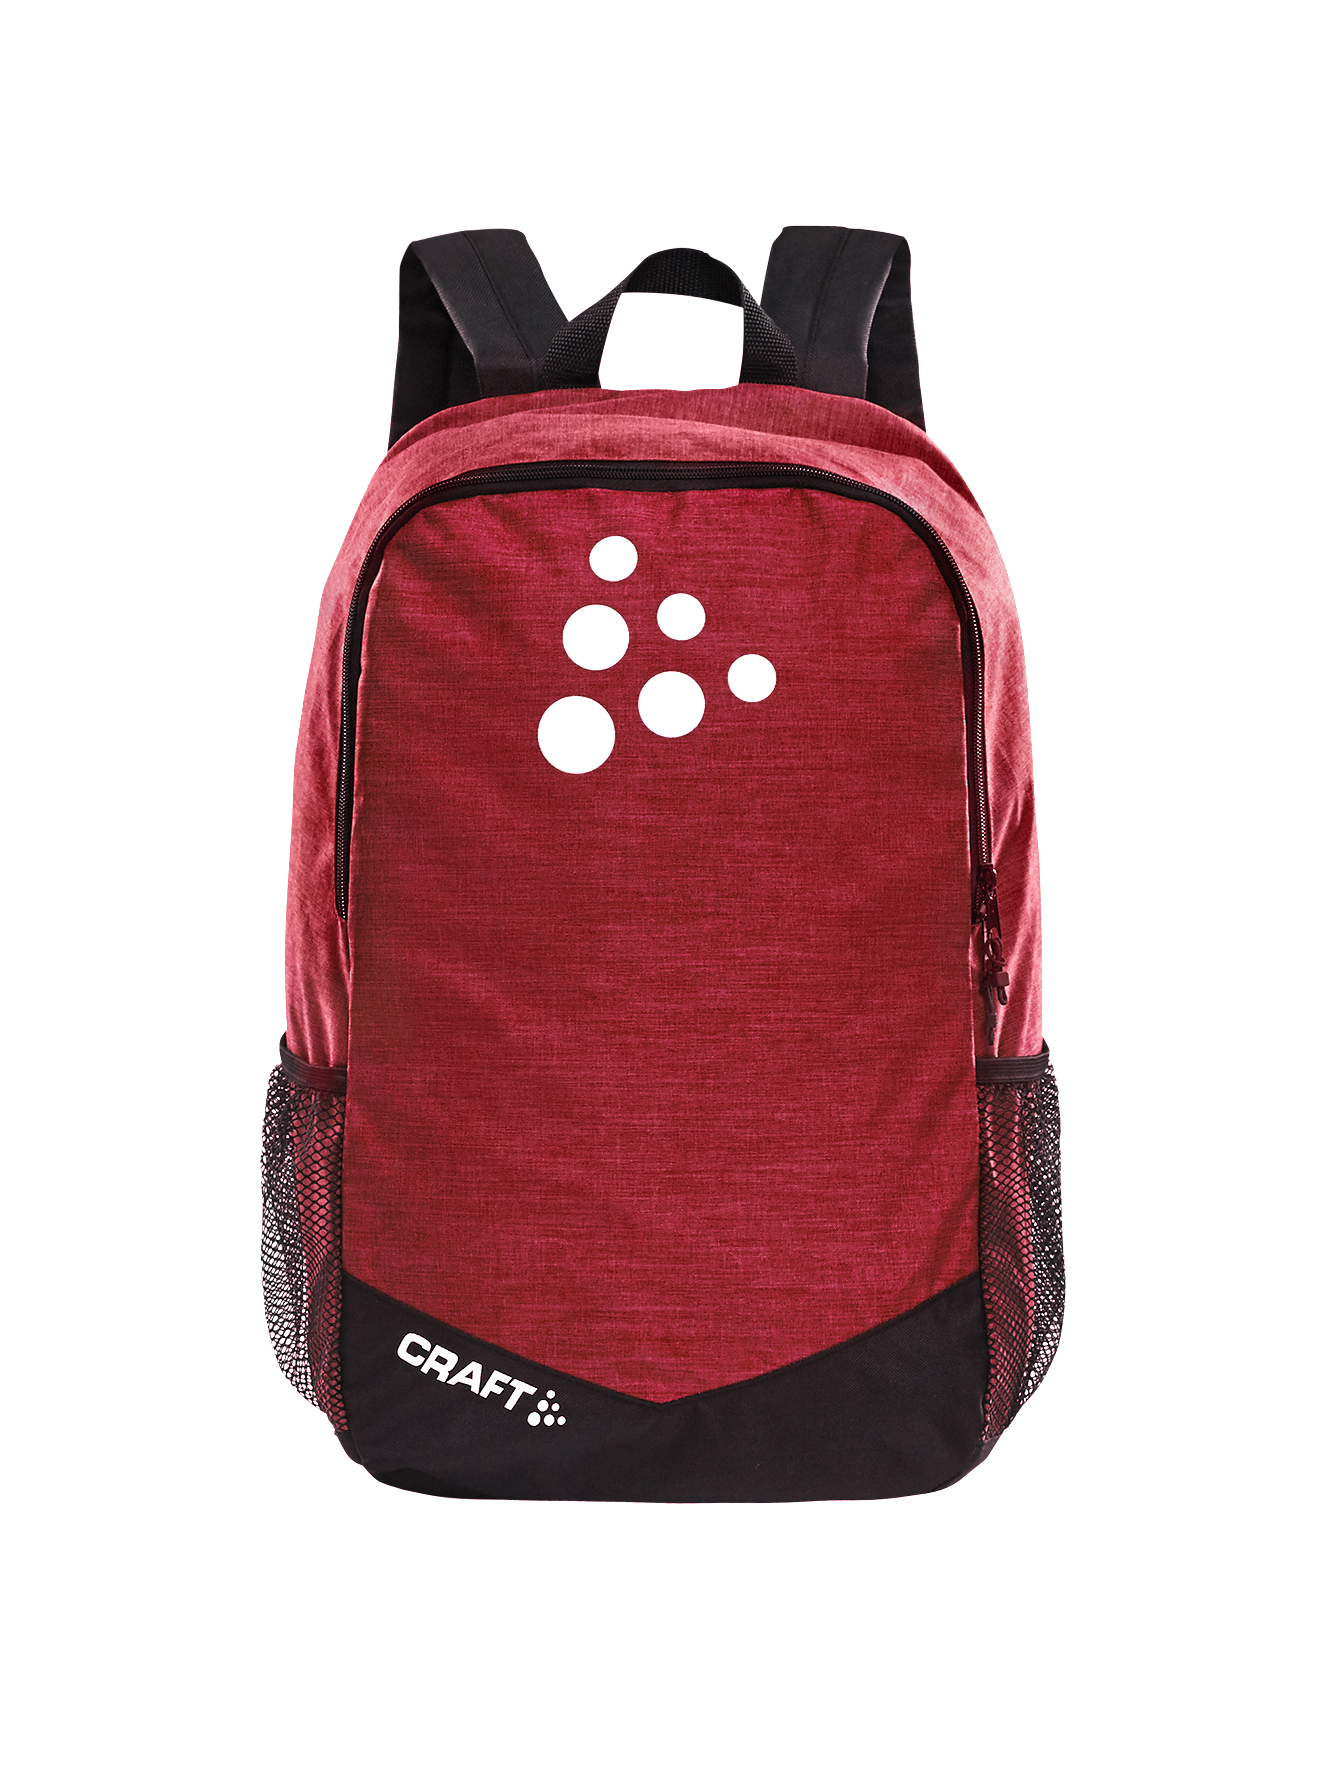 CRAFT PRACTICE BACKPACK SQUAD Black-Bright red